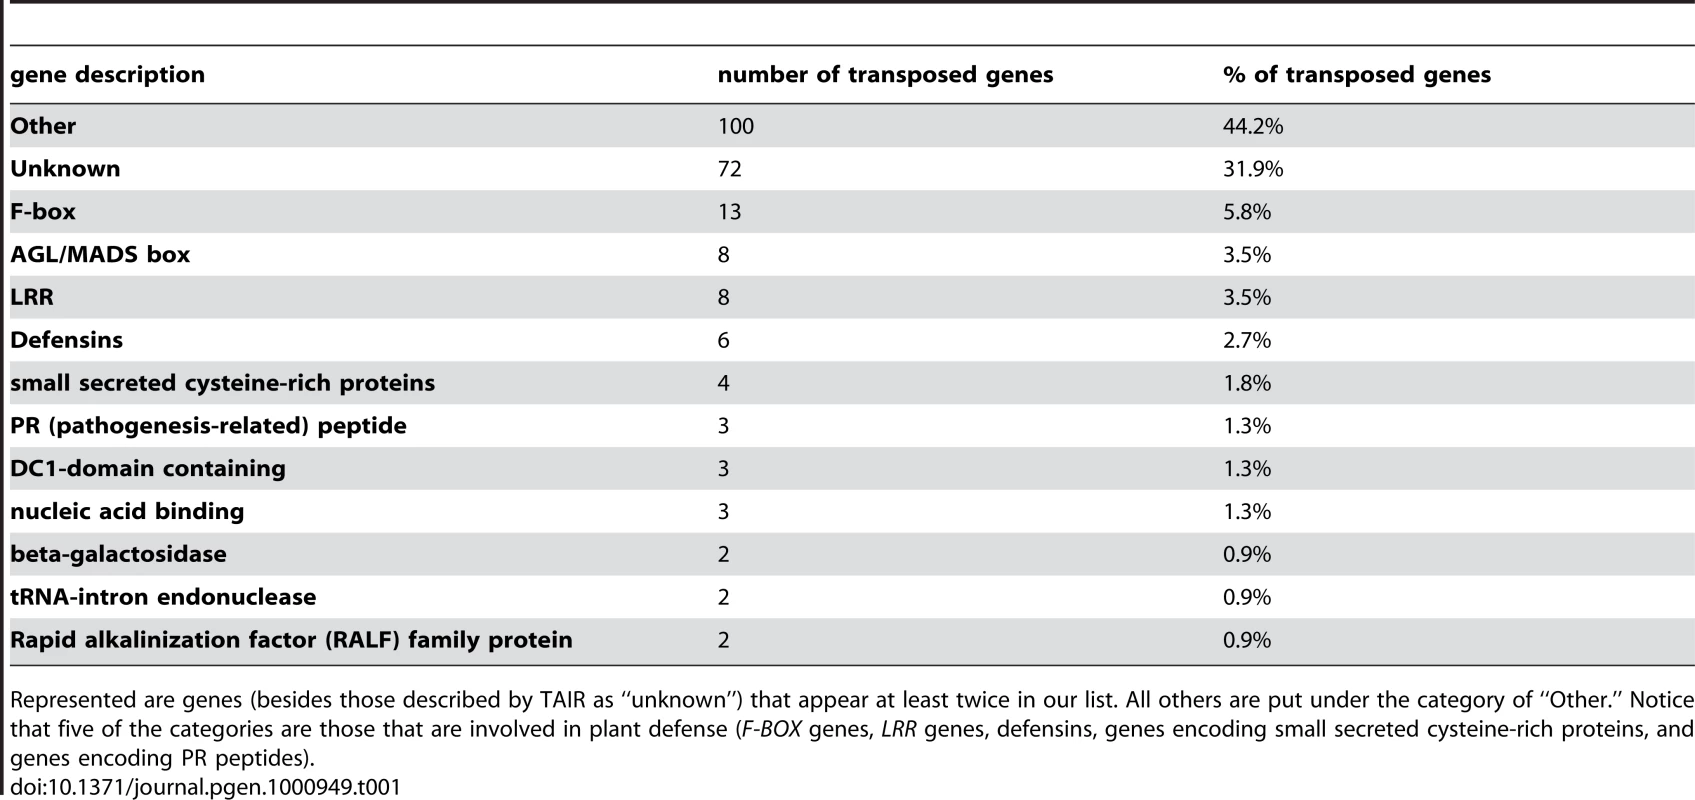 The 226 transposed genes in <i>A. thaliana</i> and their familial categories.